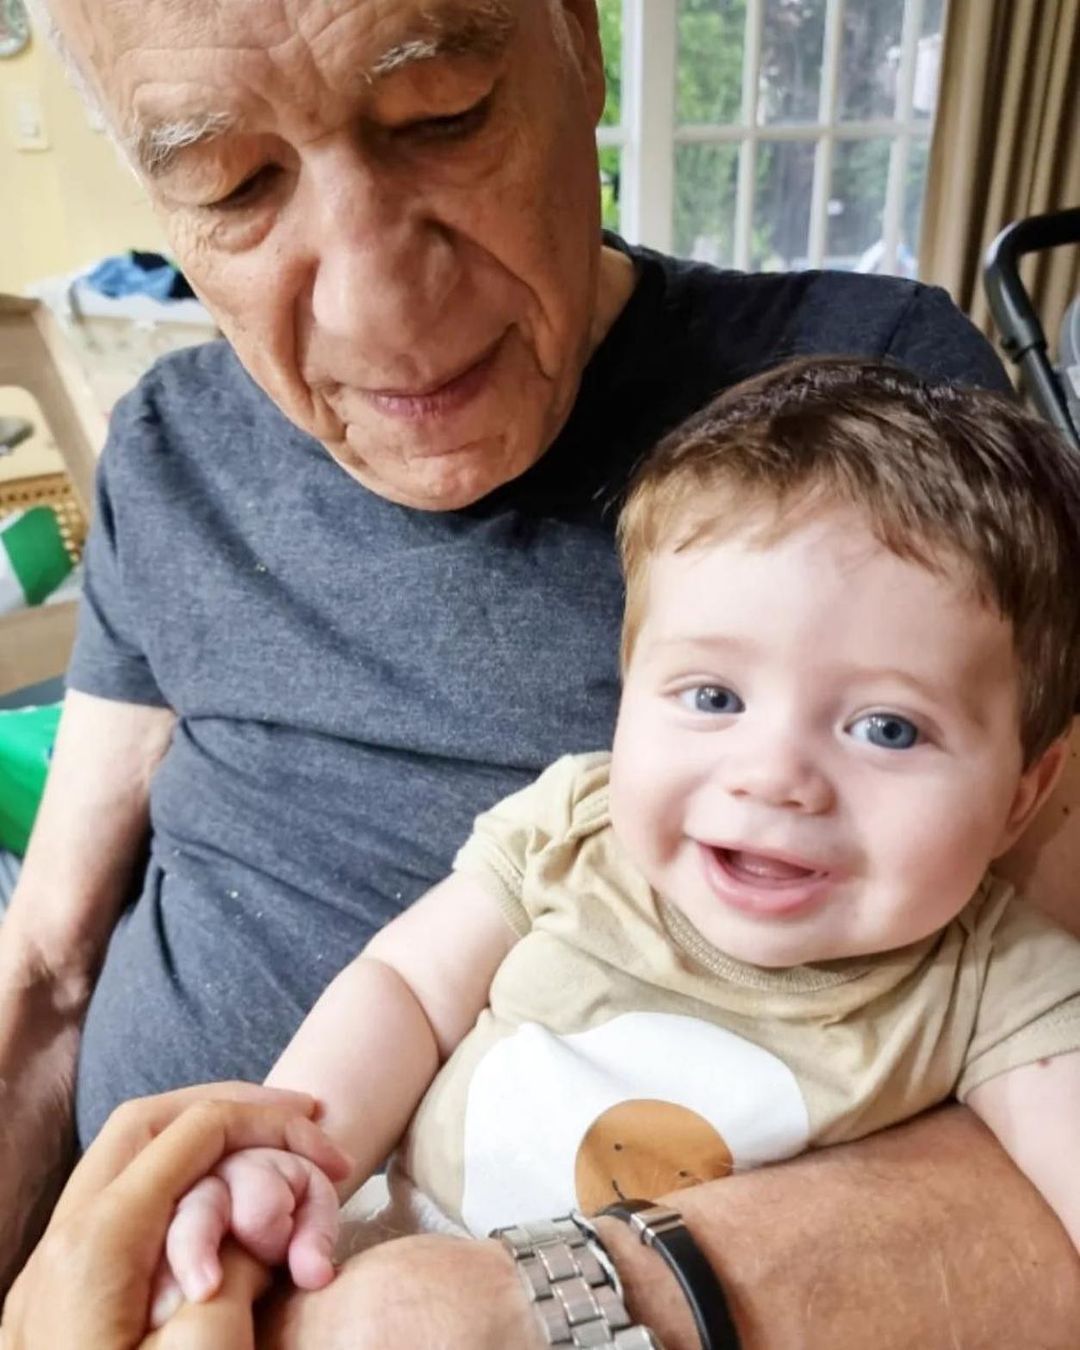 Doctor turned father at 83: ‘I will have to live 105 years to see my son graduate’